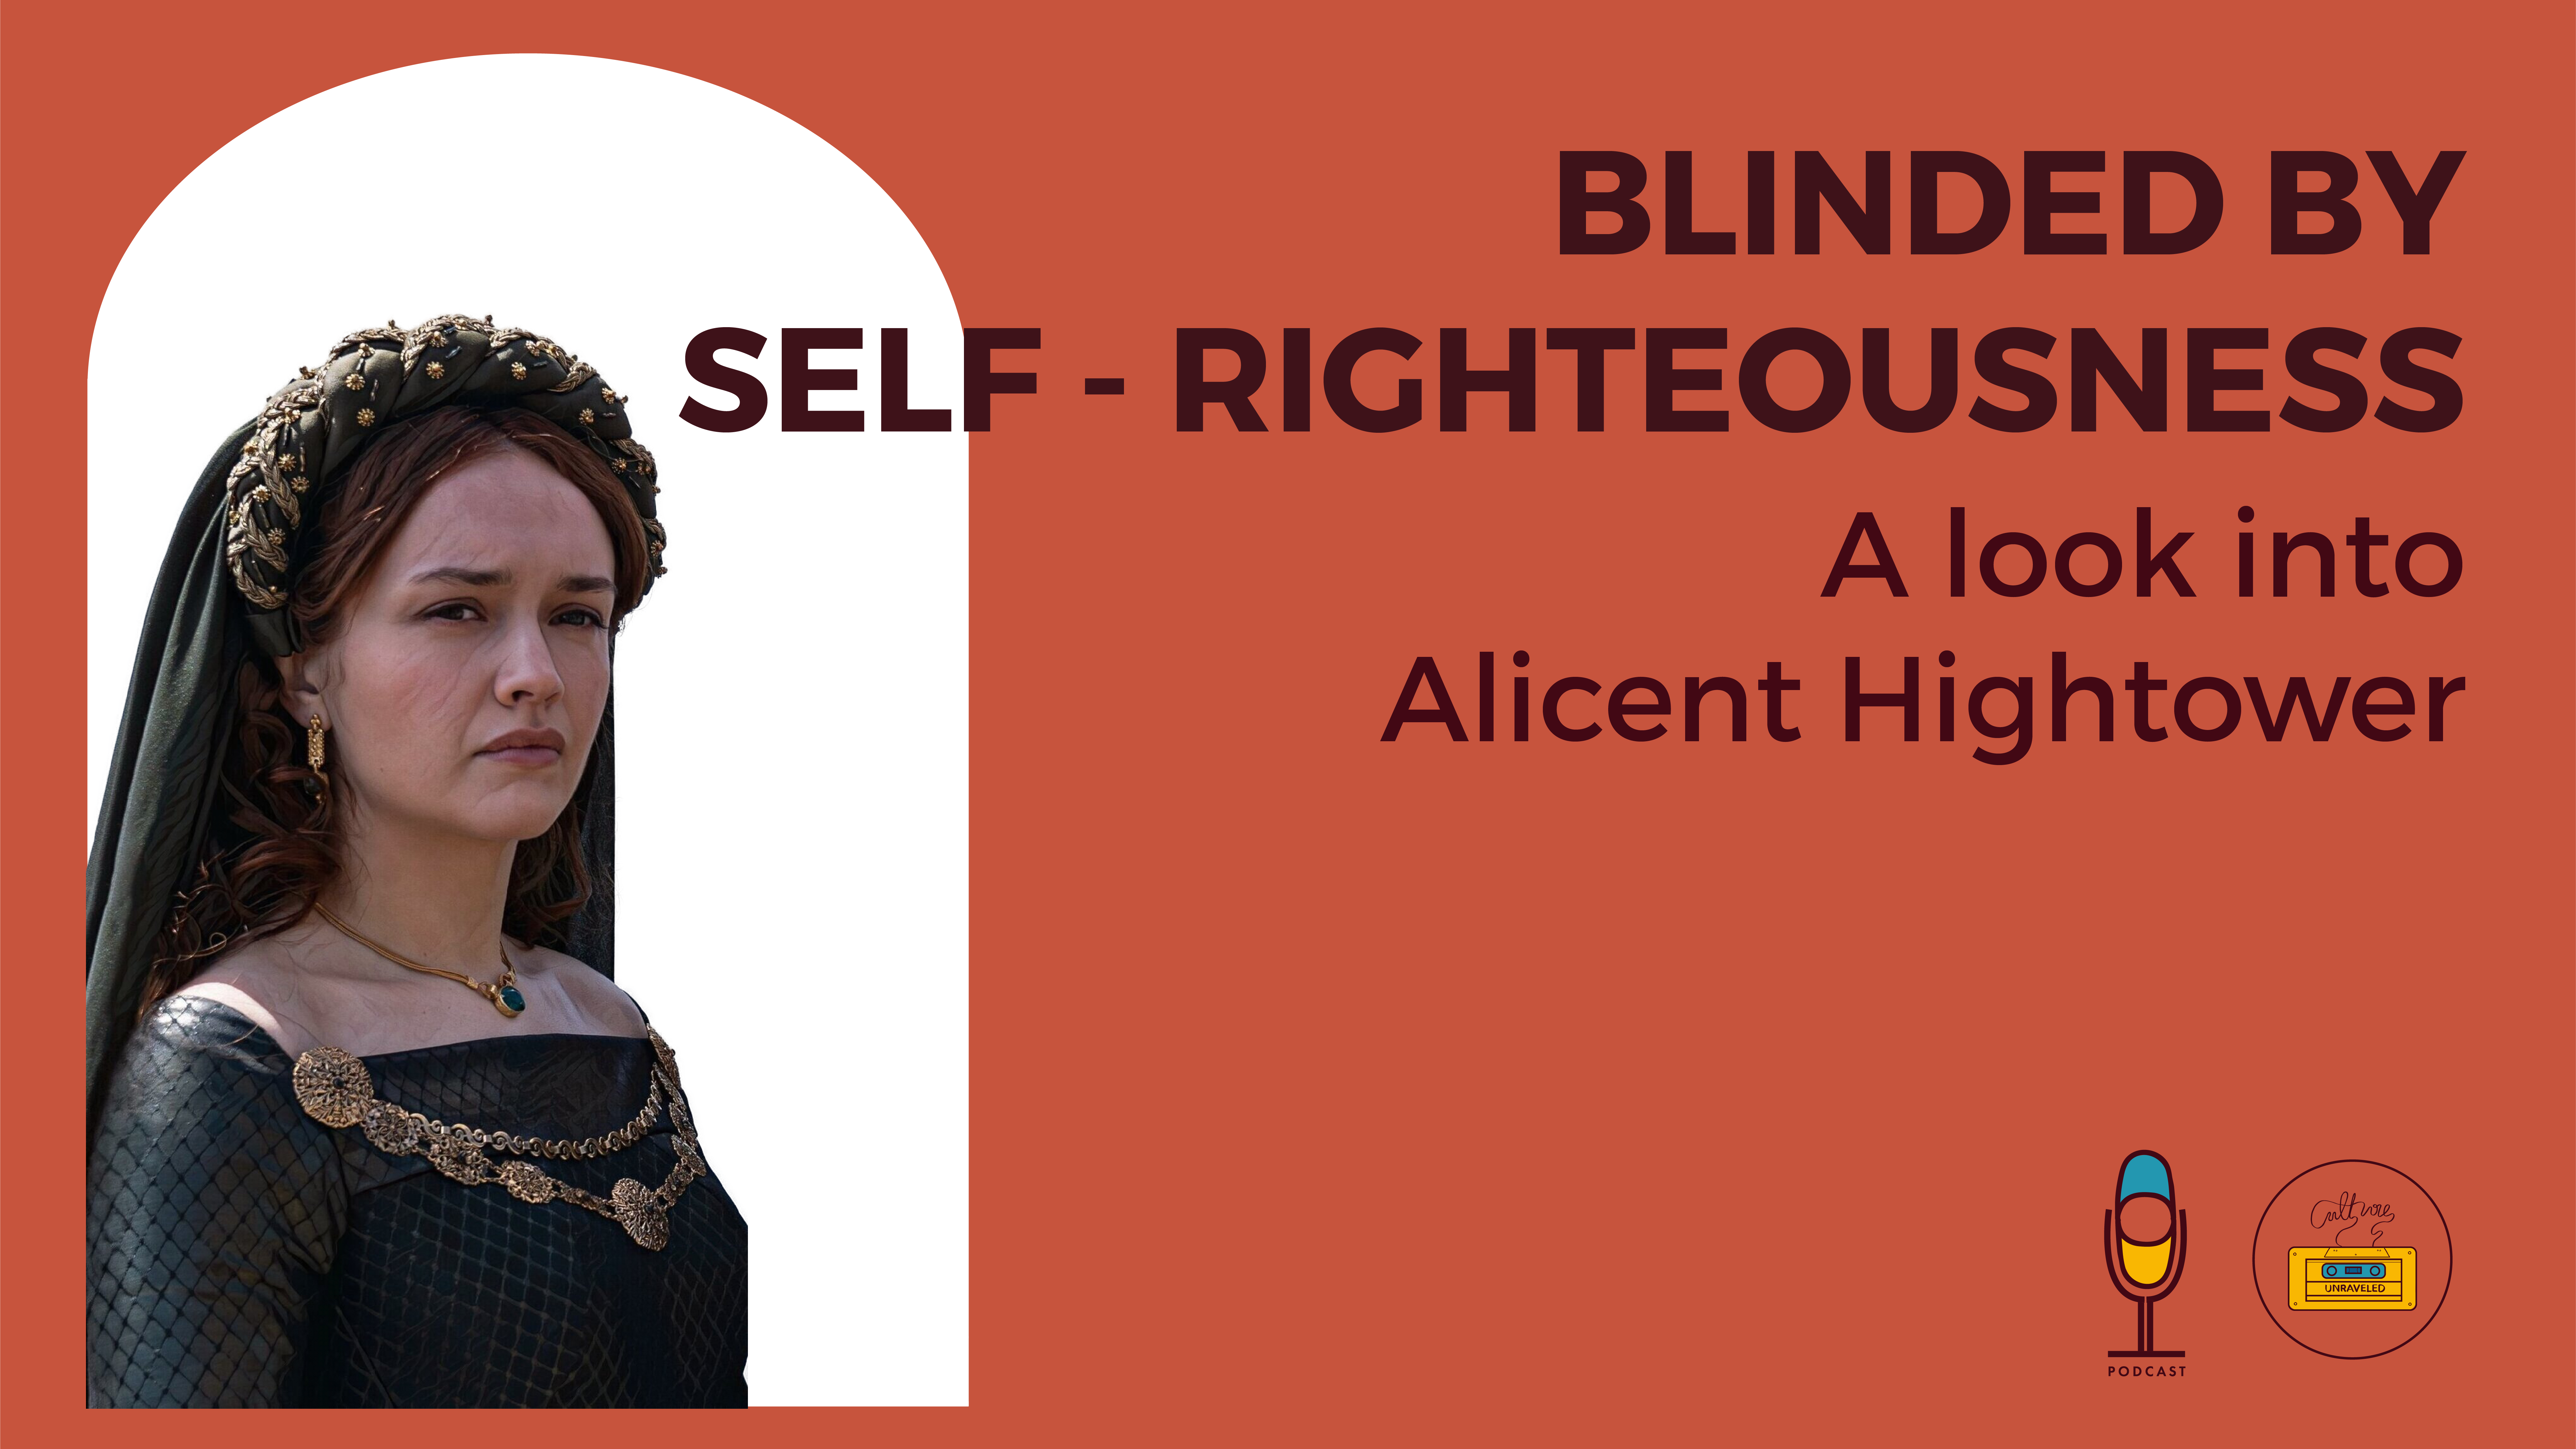 Blinded by Self- Righteousness. A Look into Alicent Hightower